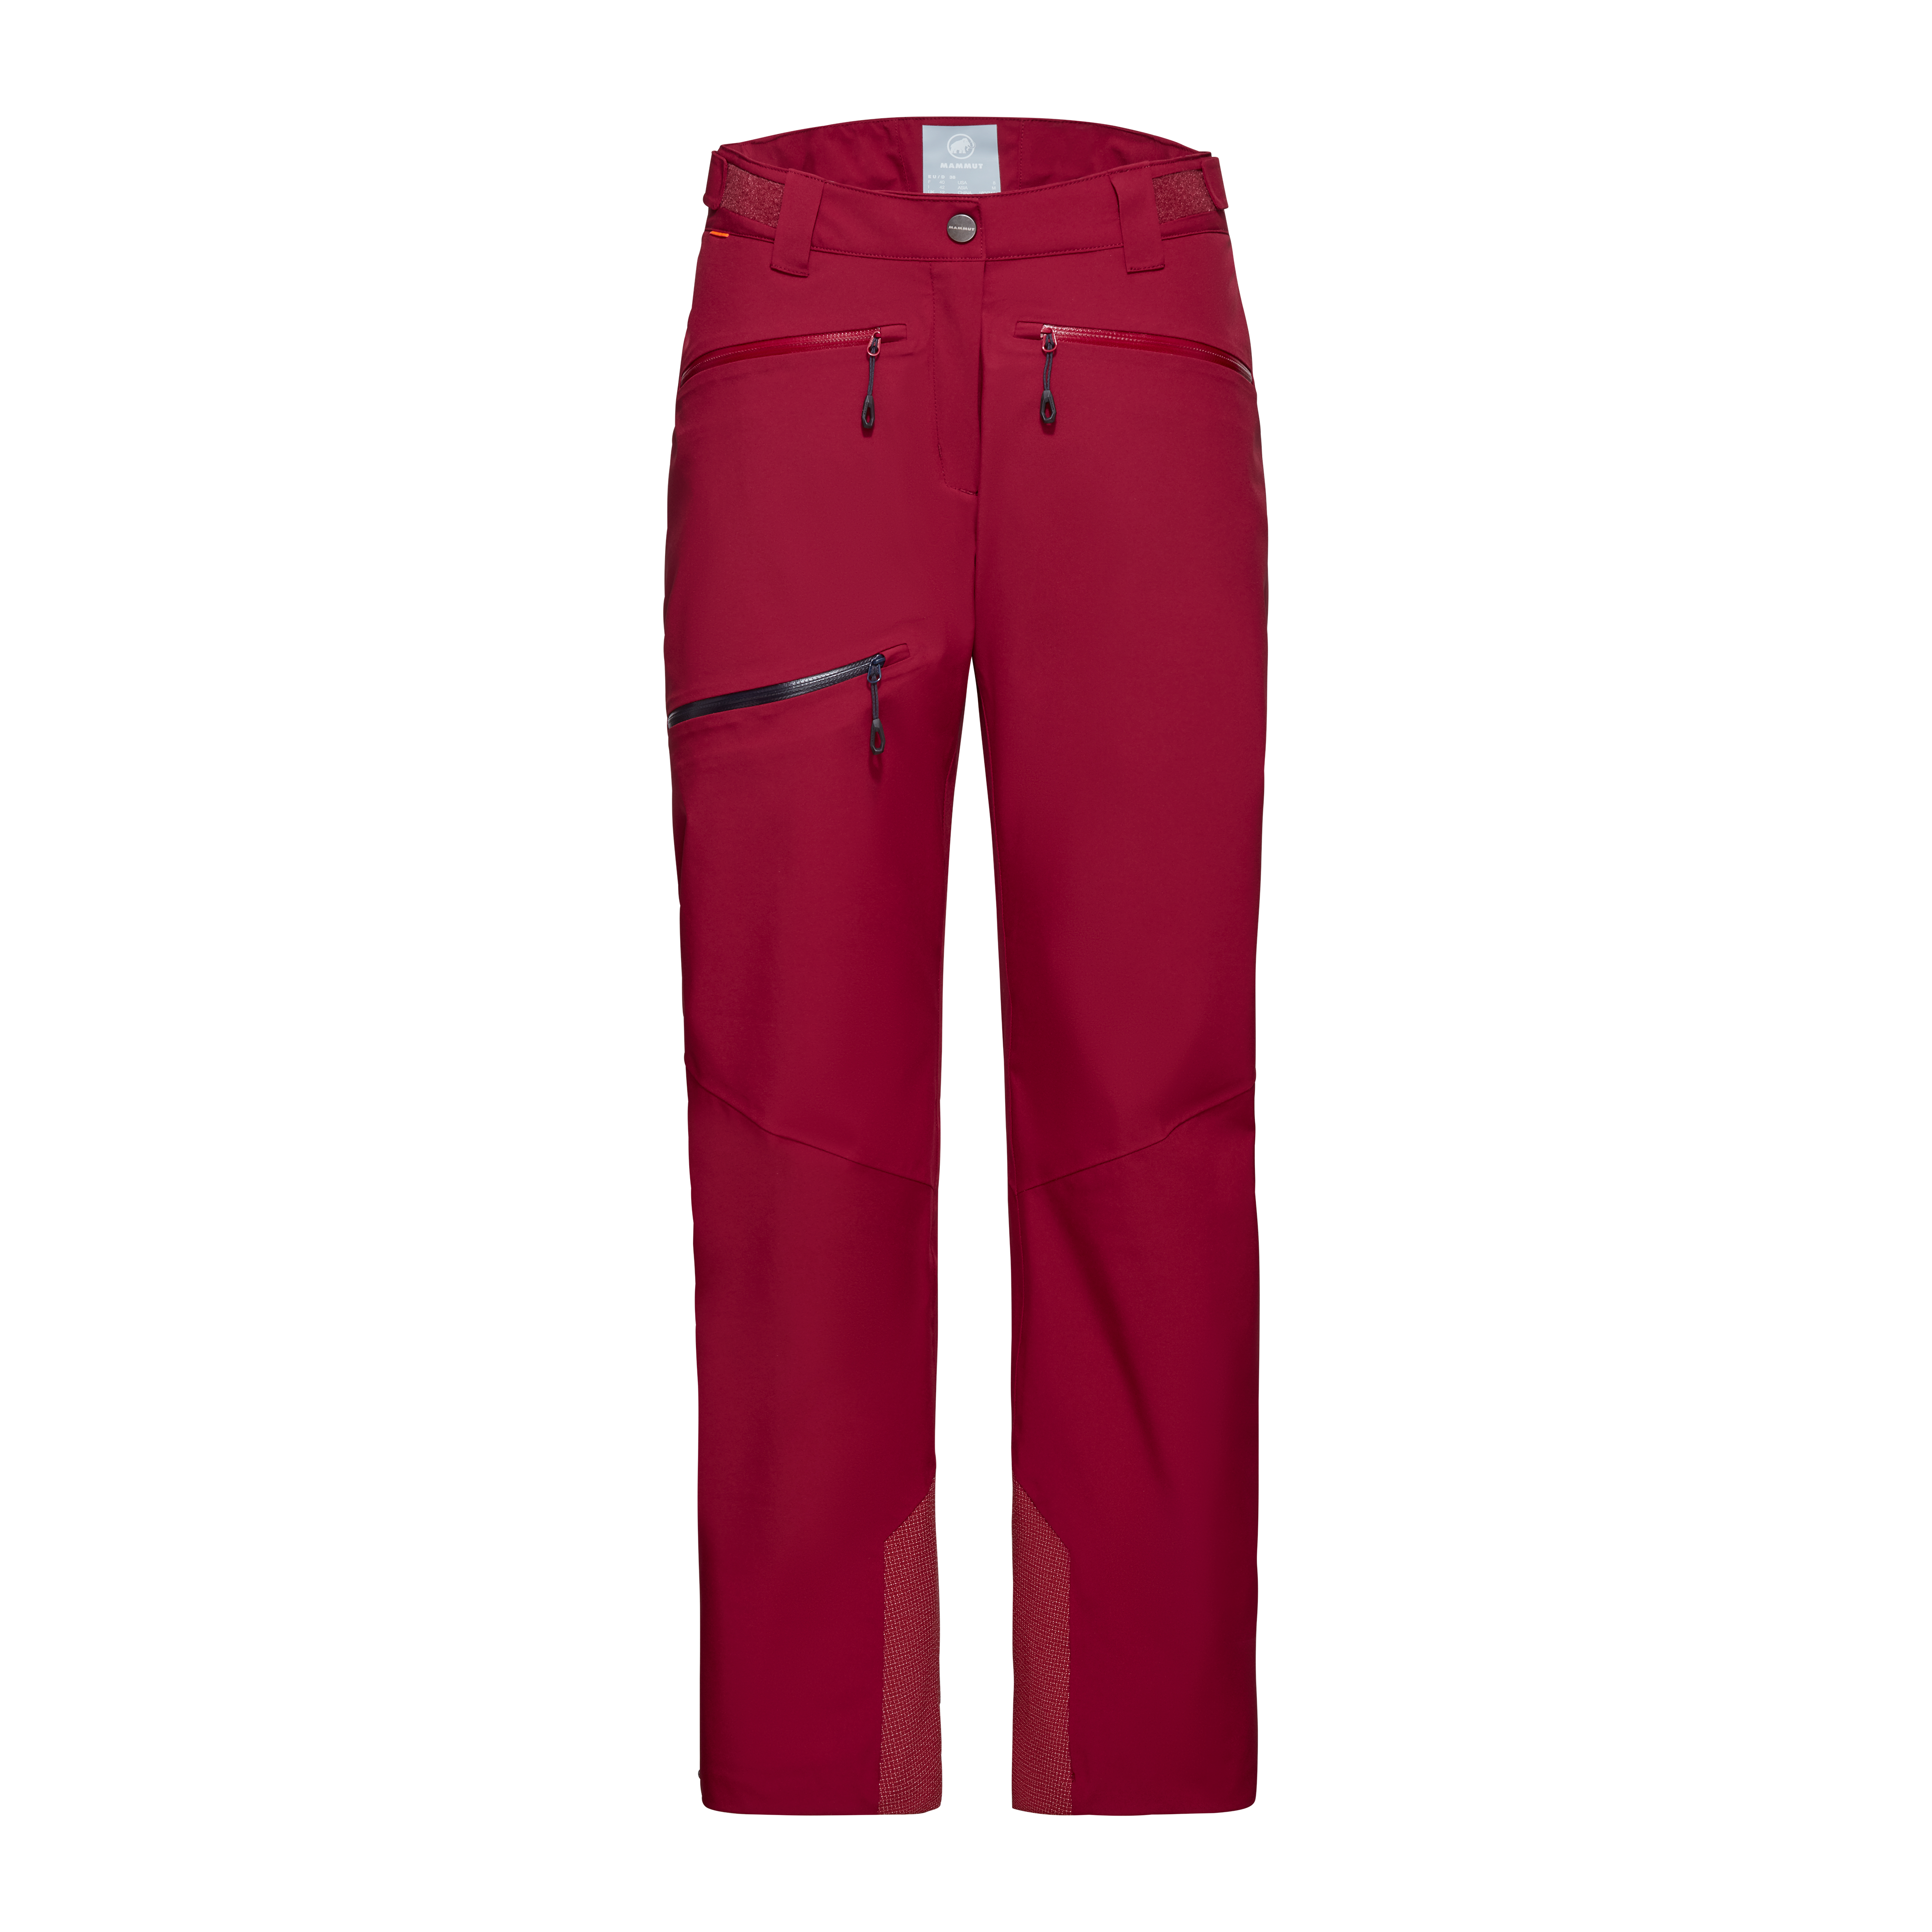 Stoney HS Thermo Pants Women - blood red, UK 6, normal thumbnail